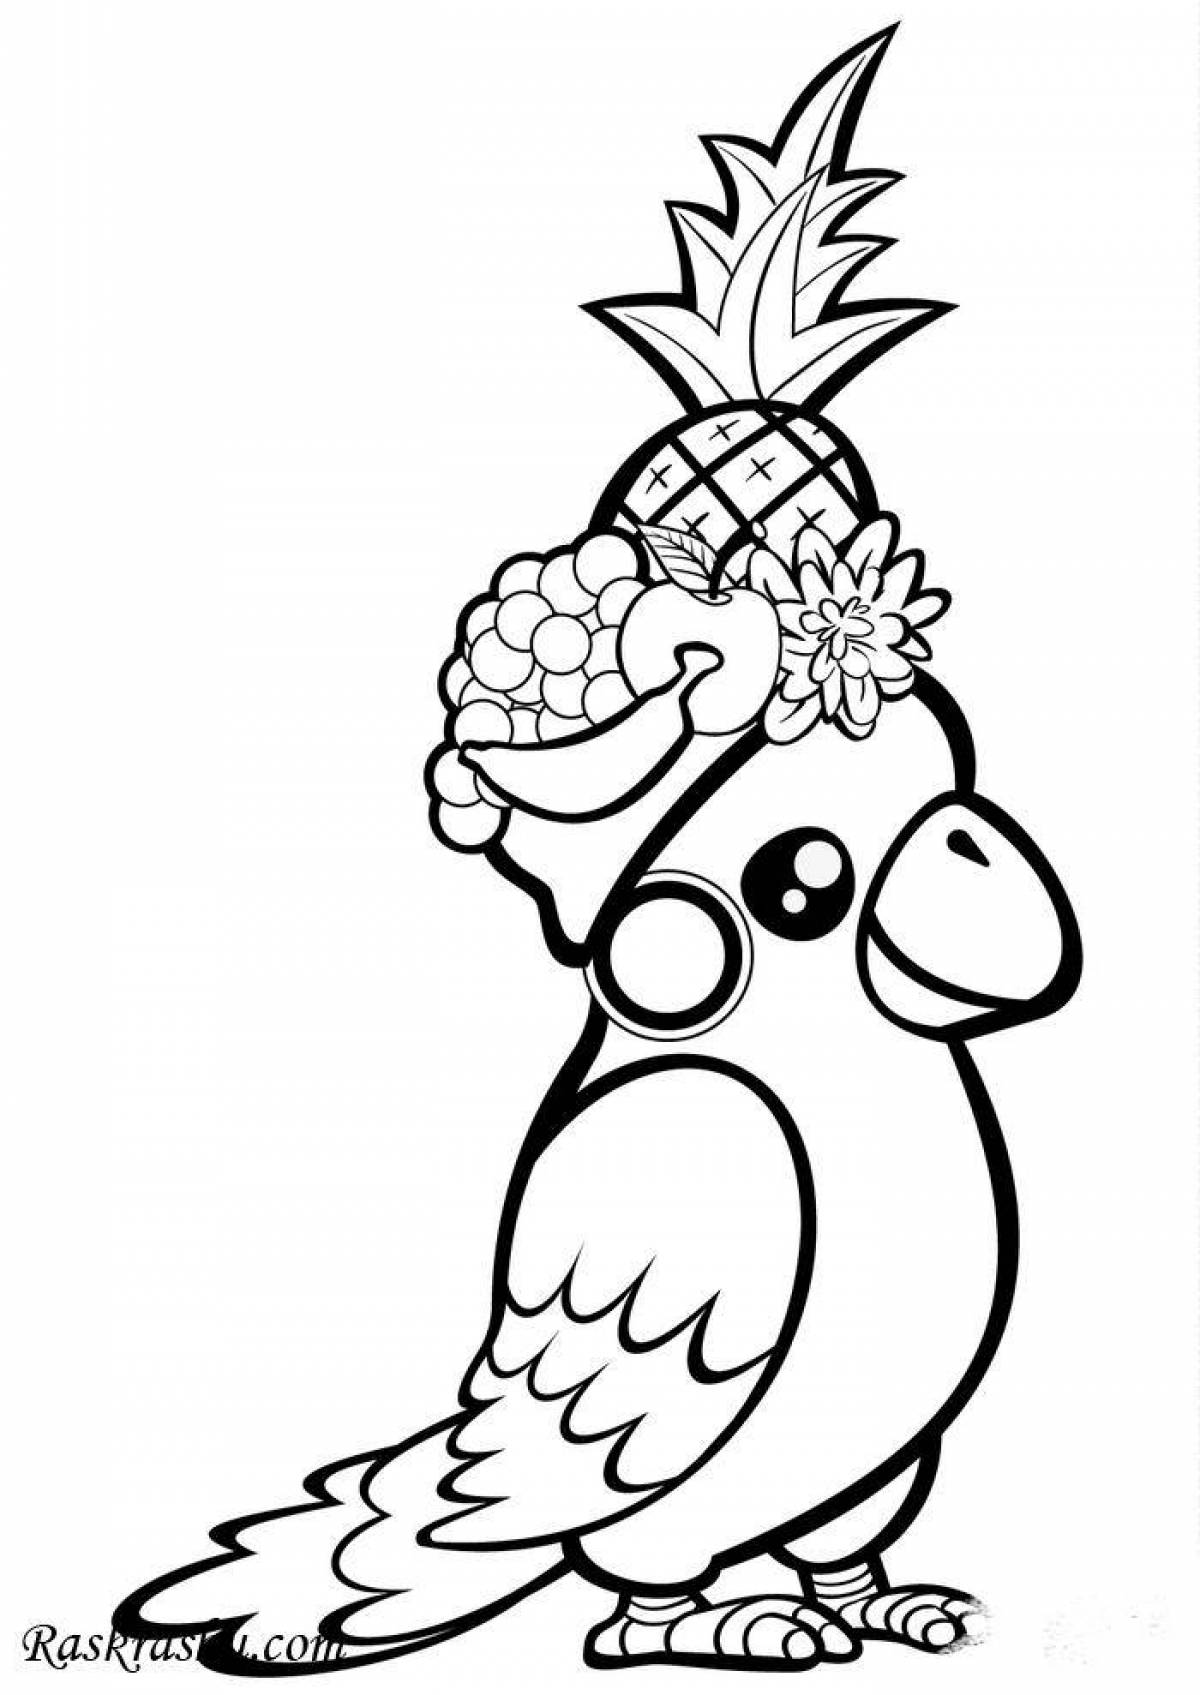 Coloring book luxury parrot